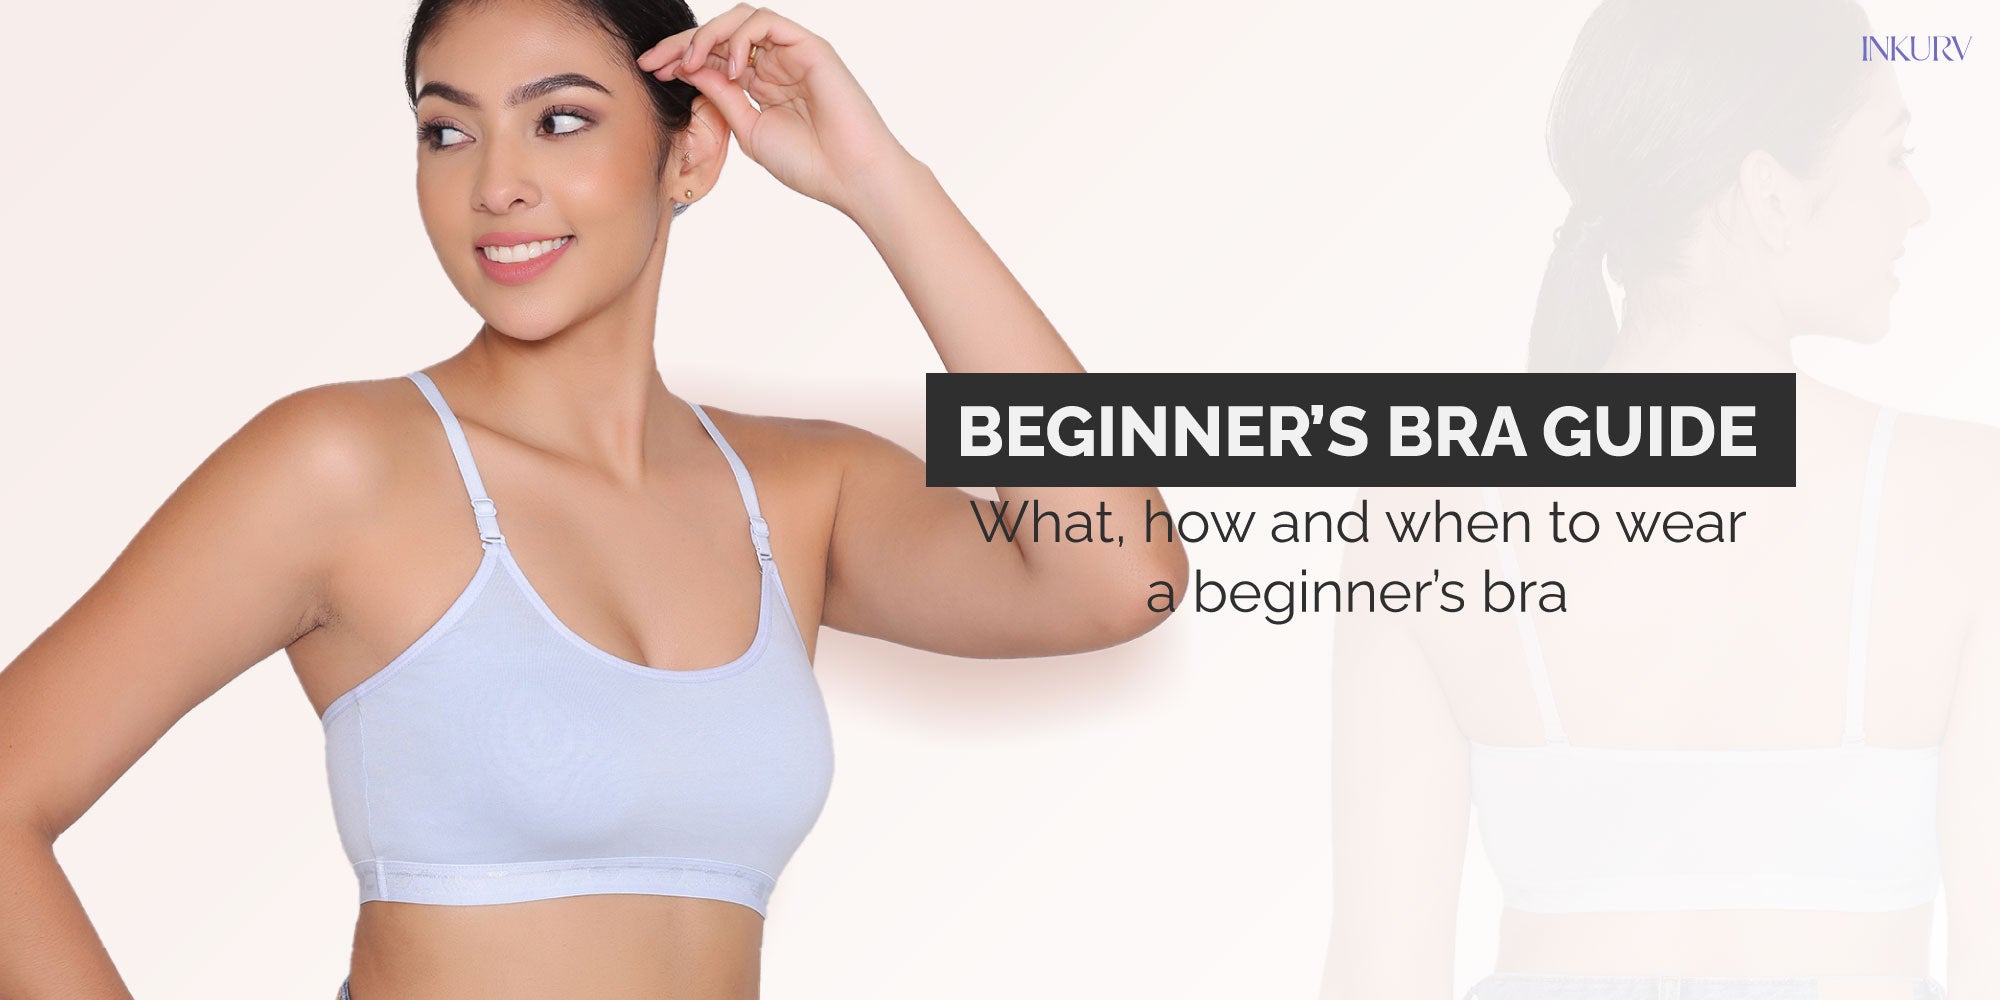 Unsure of Wearing Bra When Sleeping? Know What's Right! - Teenager Bra